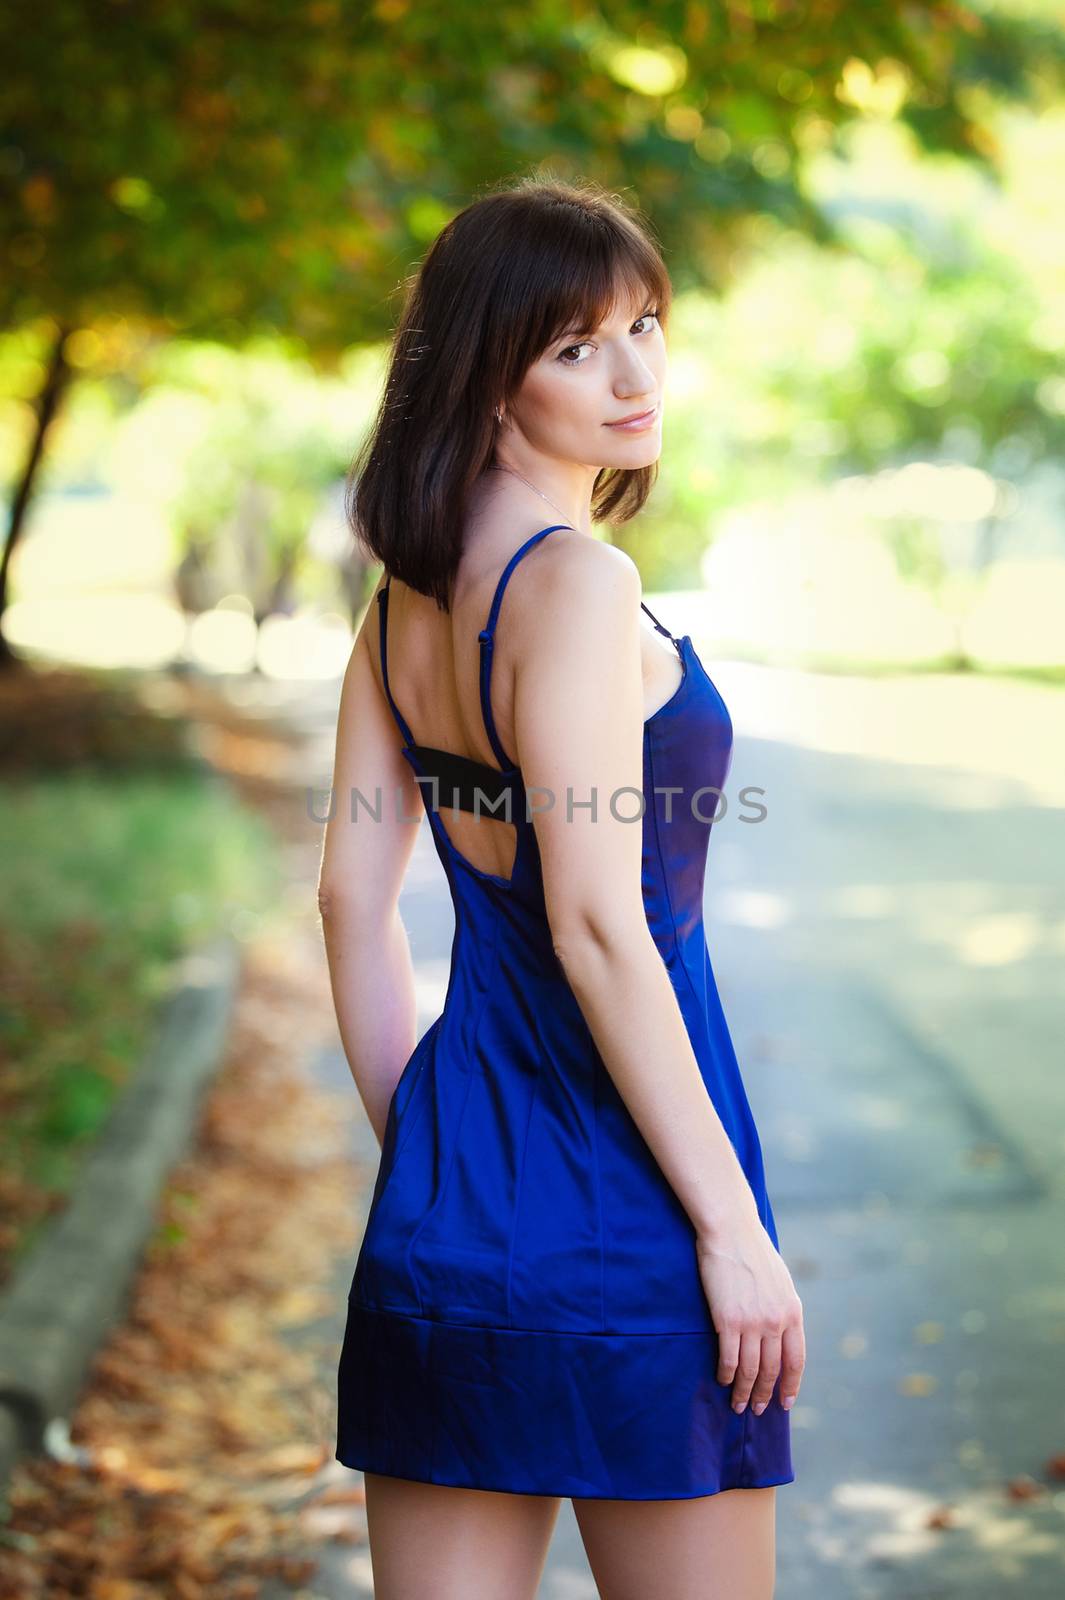 Young beautiful girl in a blue dress walk in the summer park.